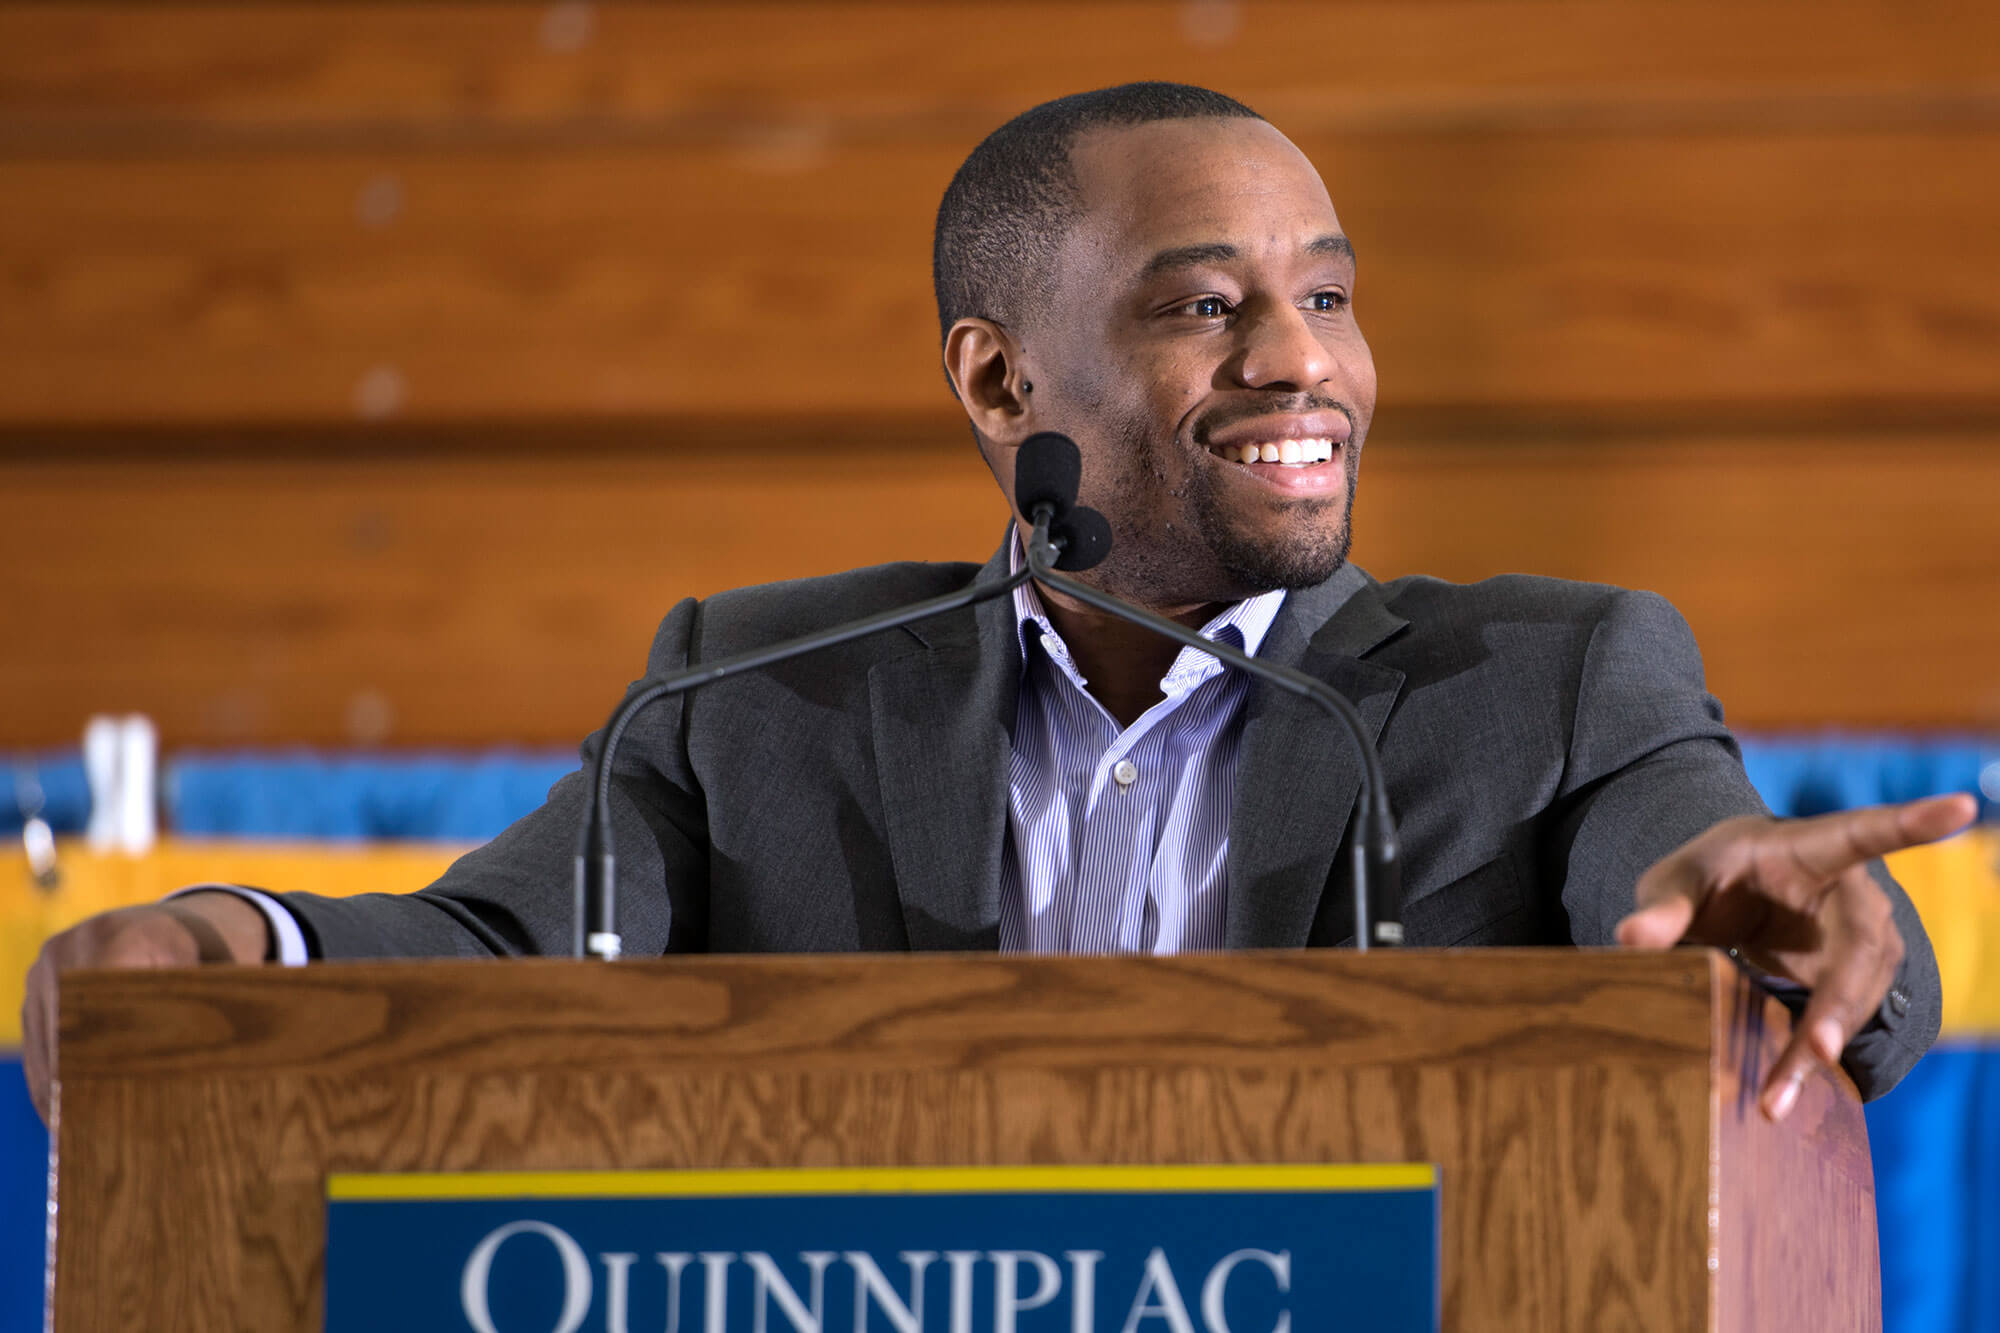 Marc Lamont Hill speaks at a podium during the Black History Month keynote event.